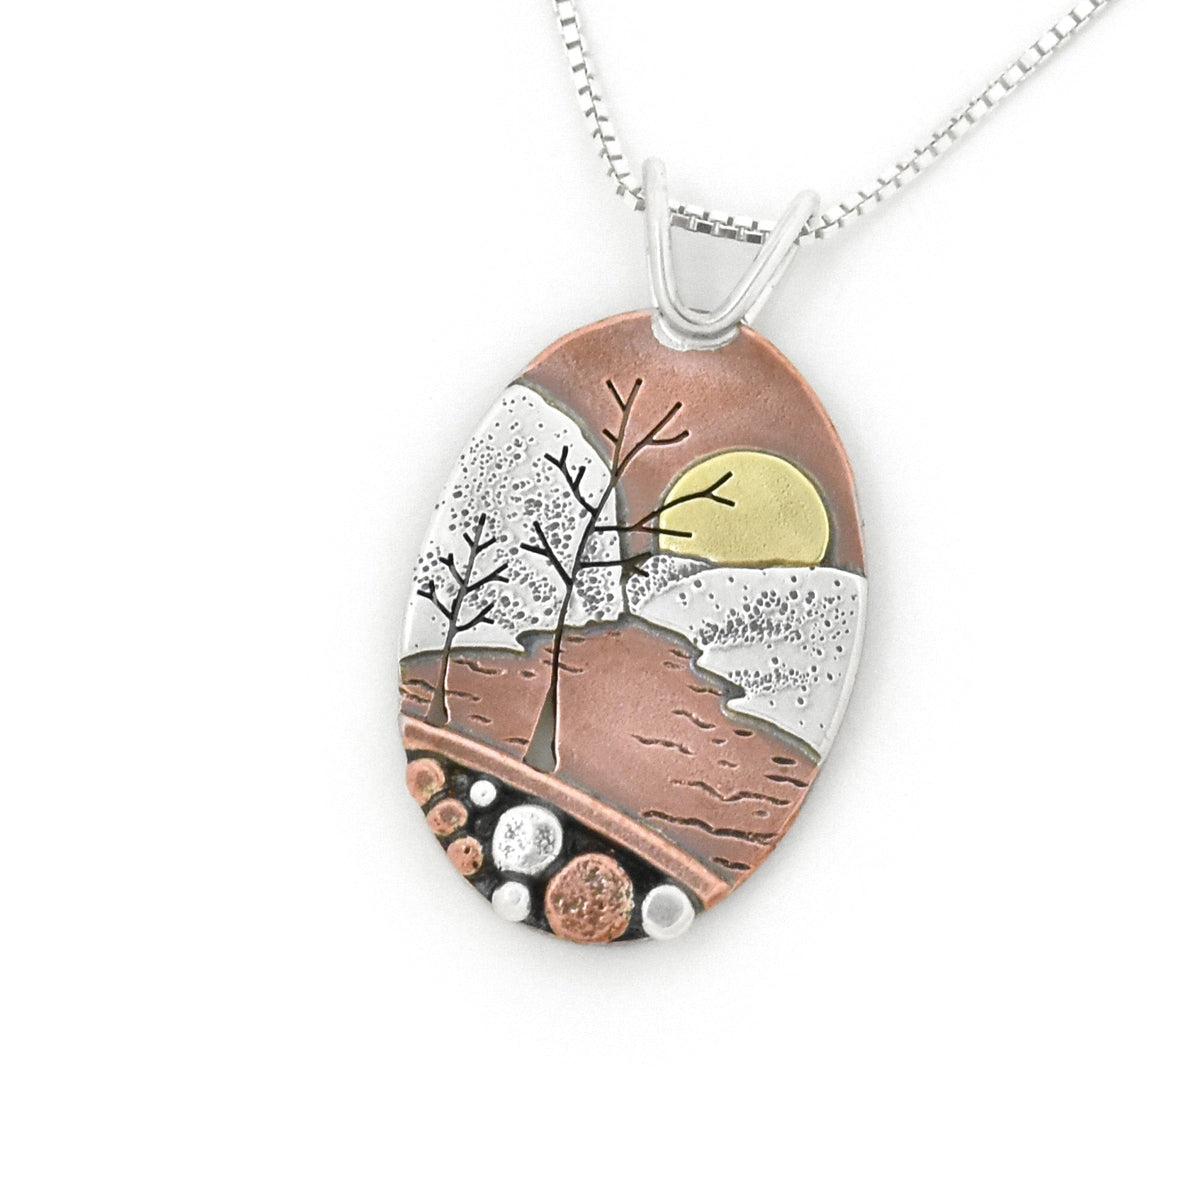 Sunset on Dead River Pendant - Mixed Metal Pendant   7103 - handmade by Beth Millner Jewelry